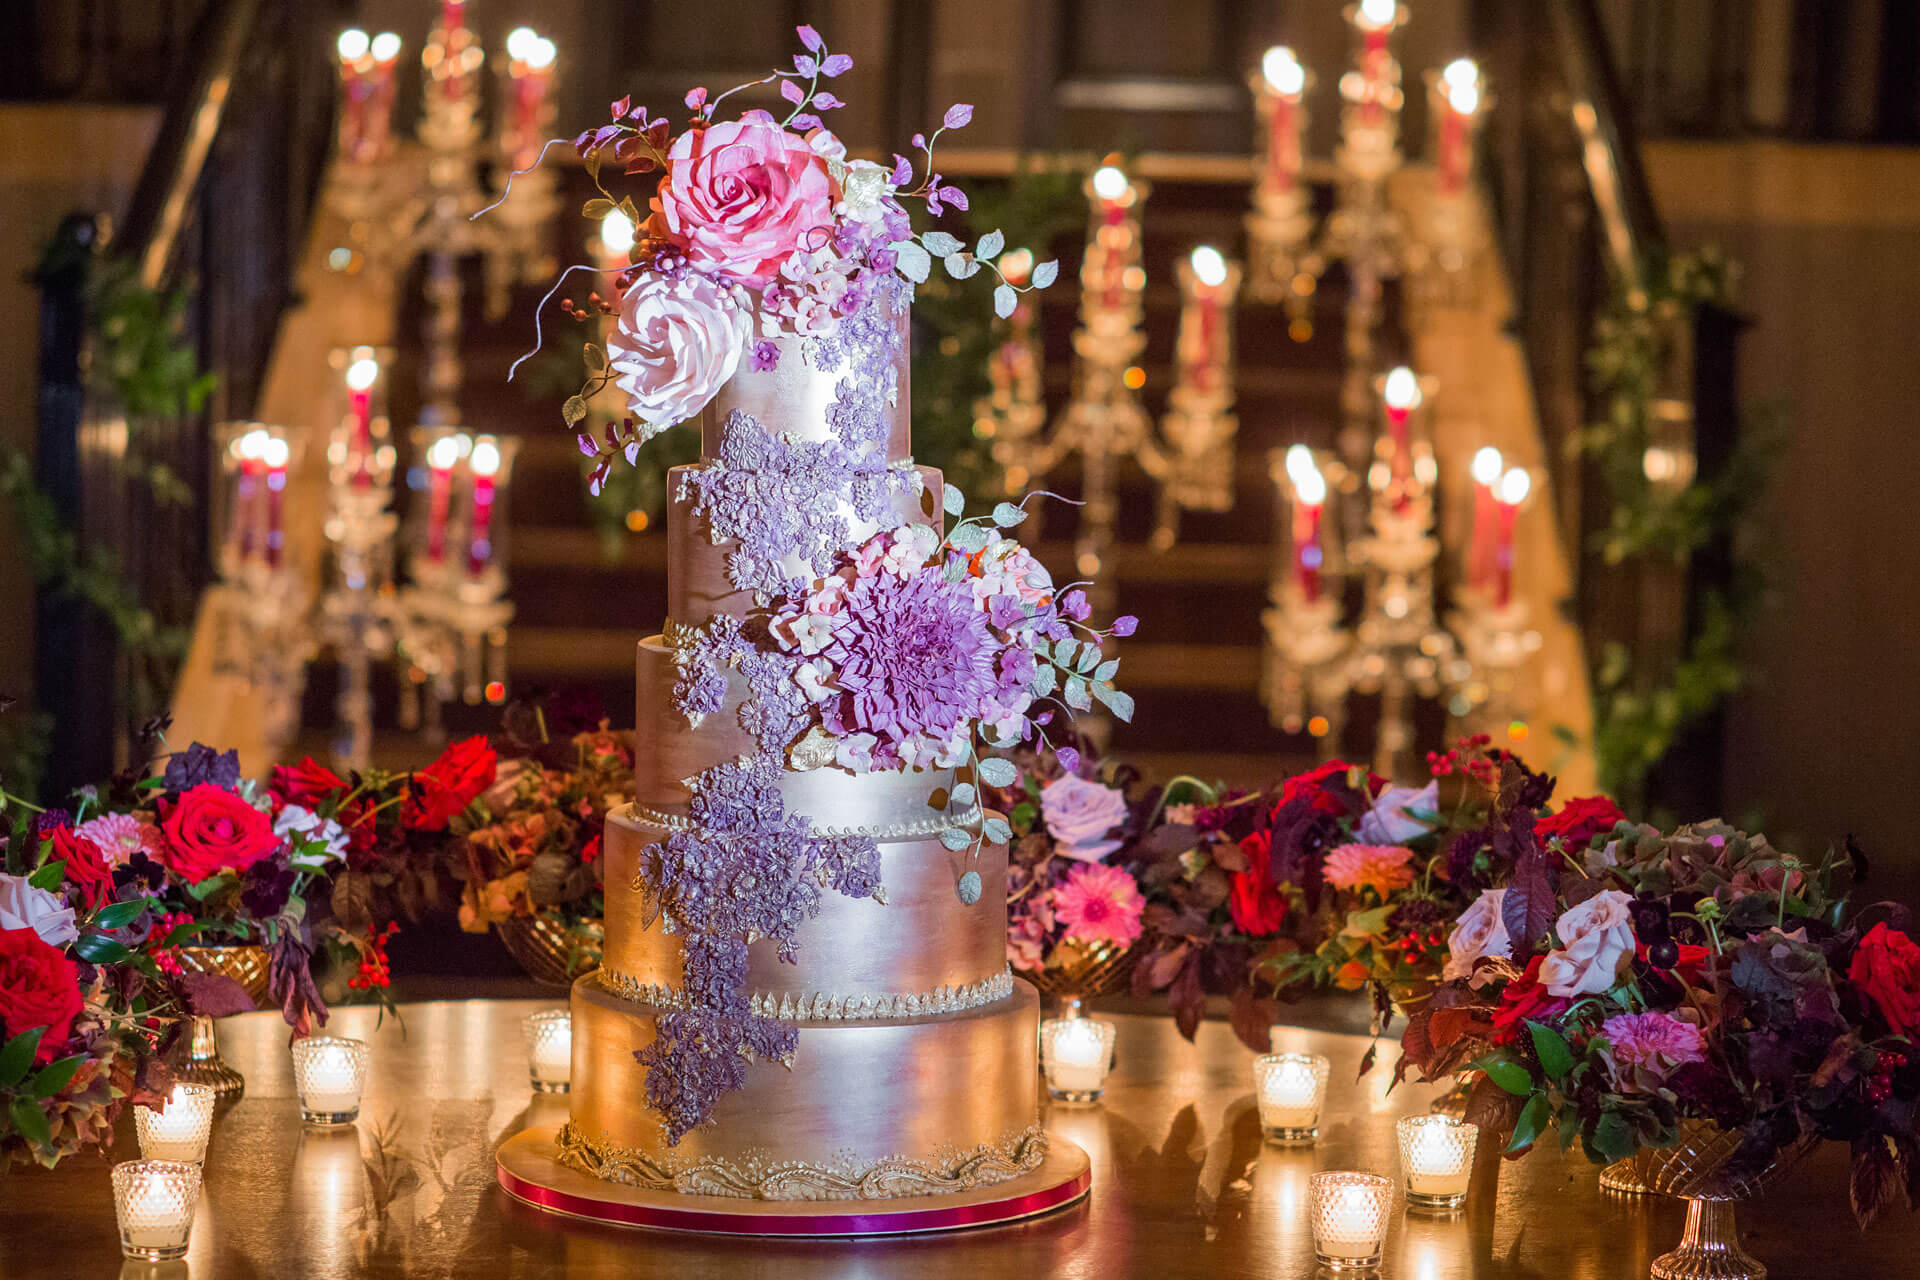 The By Yevnig experience - Luxury wedding & occasion cakes